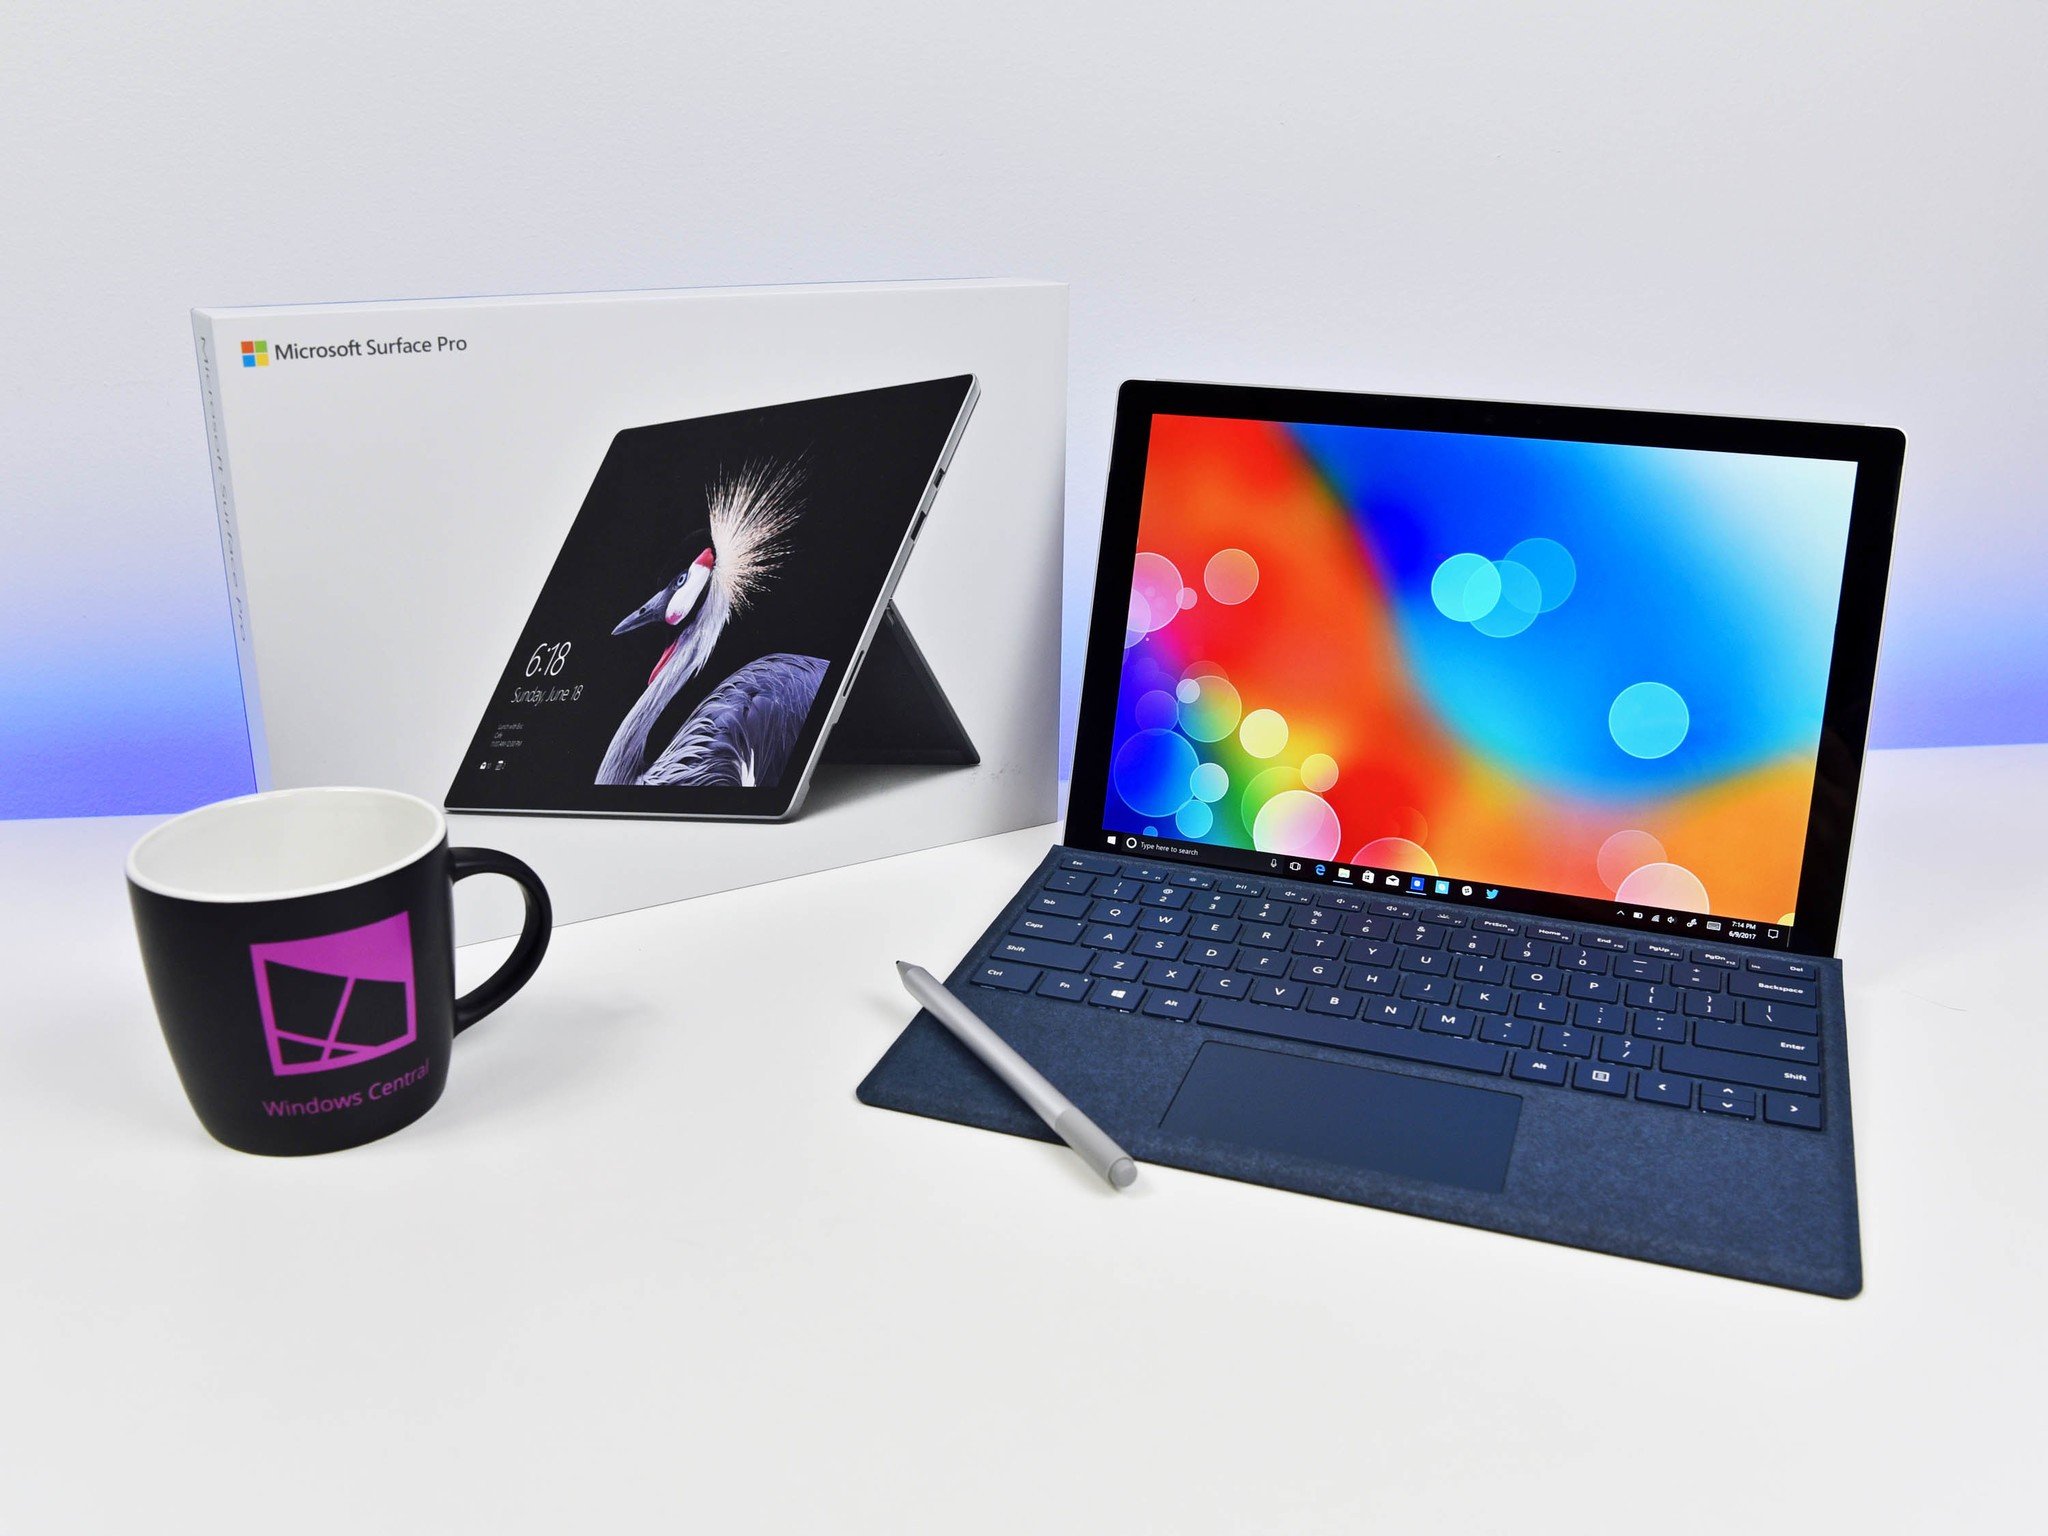 Chime in: What's the best charger for Microsoft's Surface Pro?